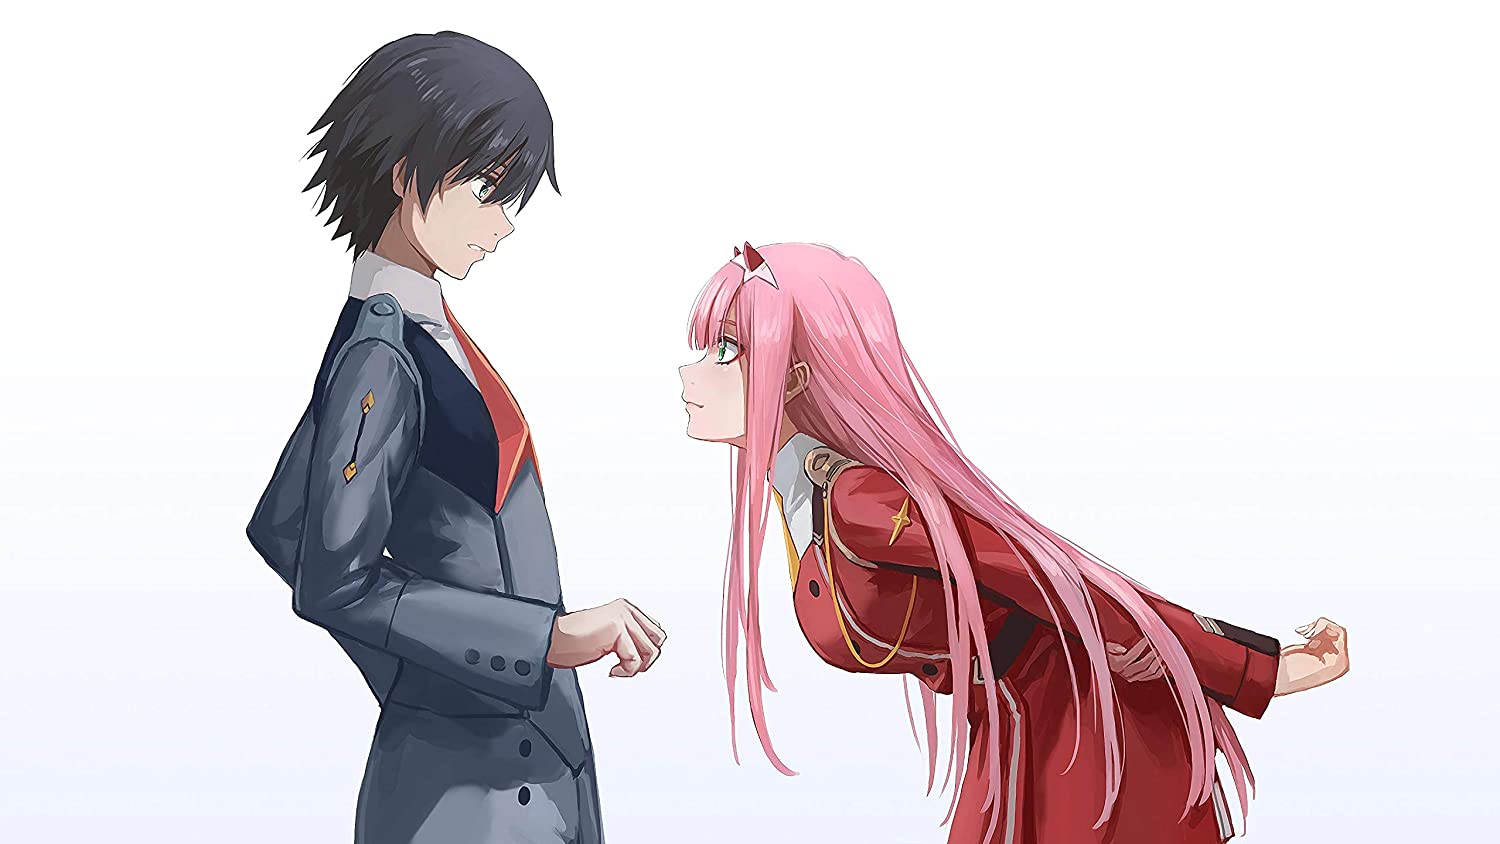 Darling in the Franxx Poster Wall Print Wall Decor Wallpaper Anime AnimeHome Decor Gift for Her Gift for Him: Handmade